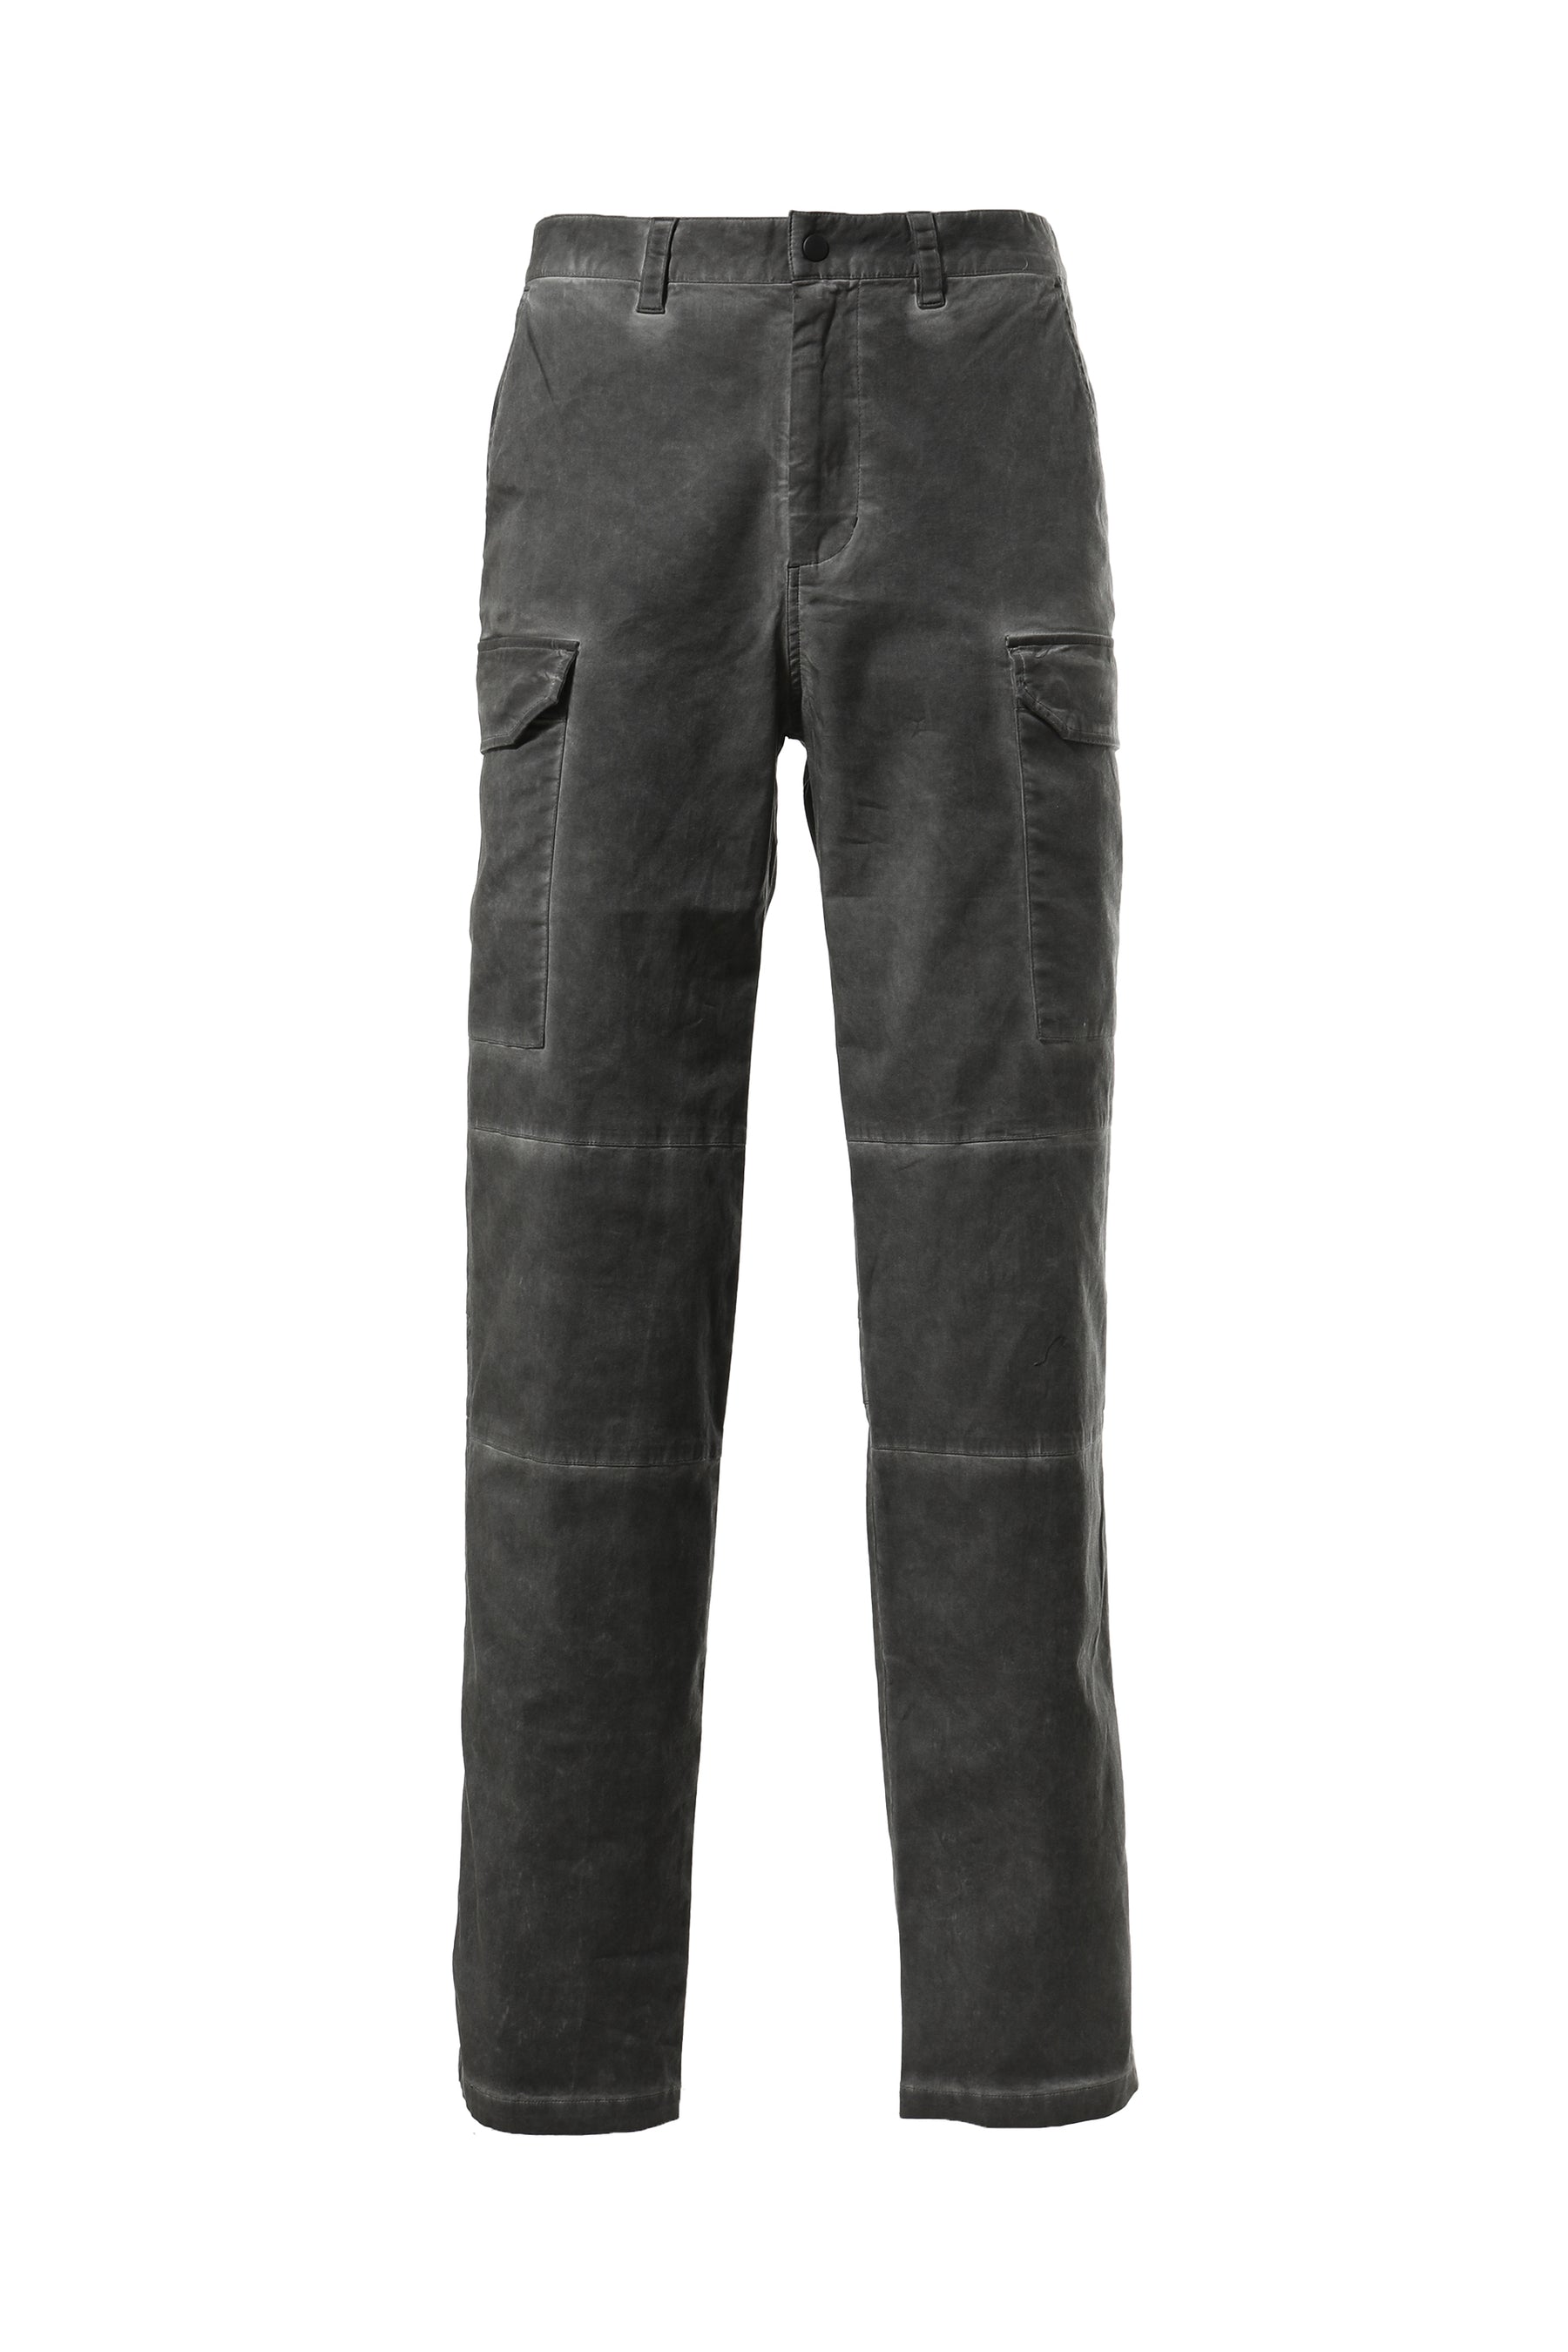 STAMPD FW23 OIL WASHED CARGO PANT / BLK -NUBIAN